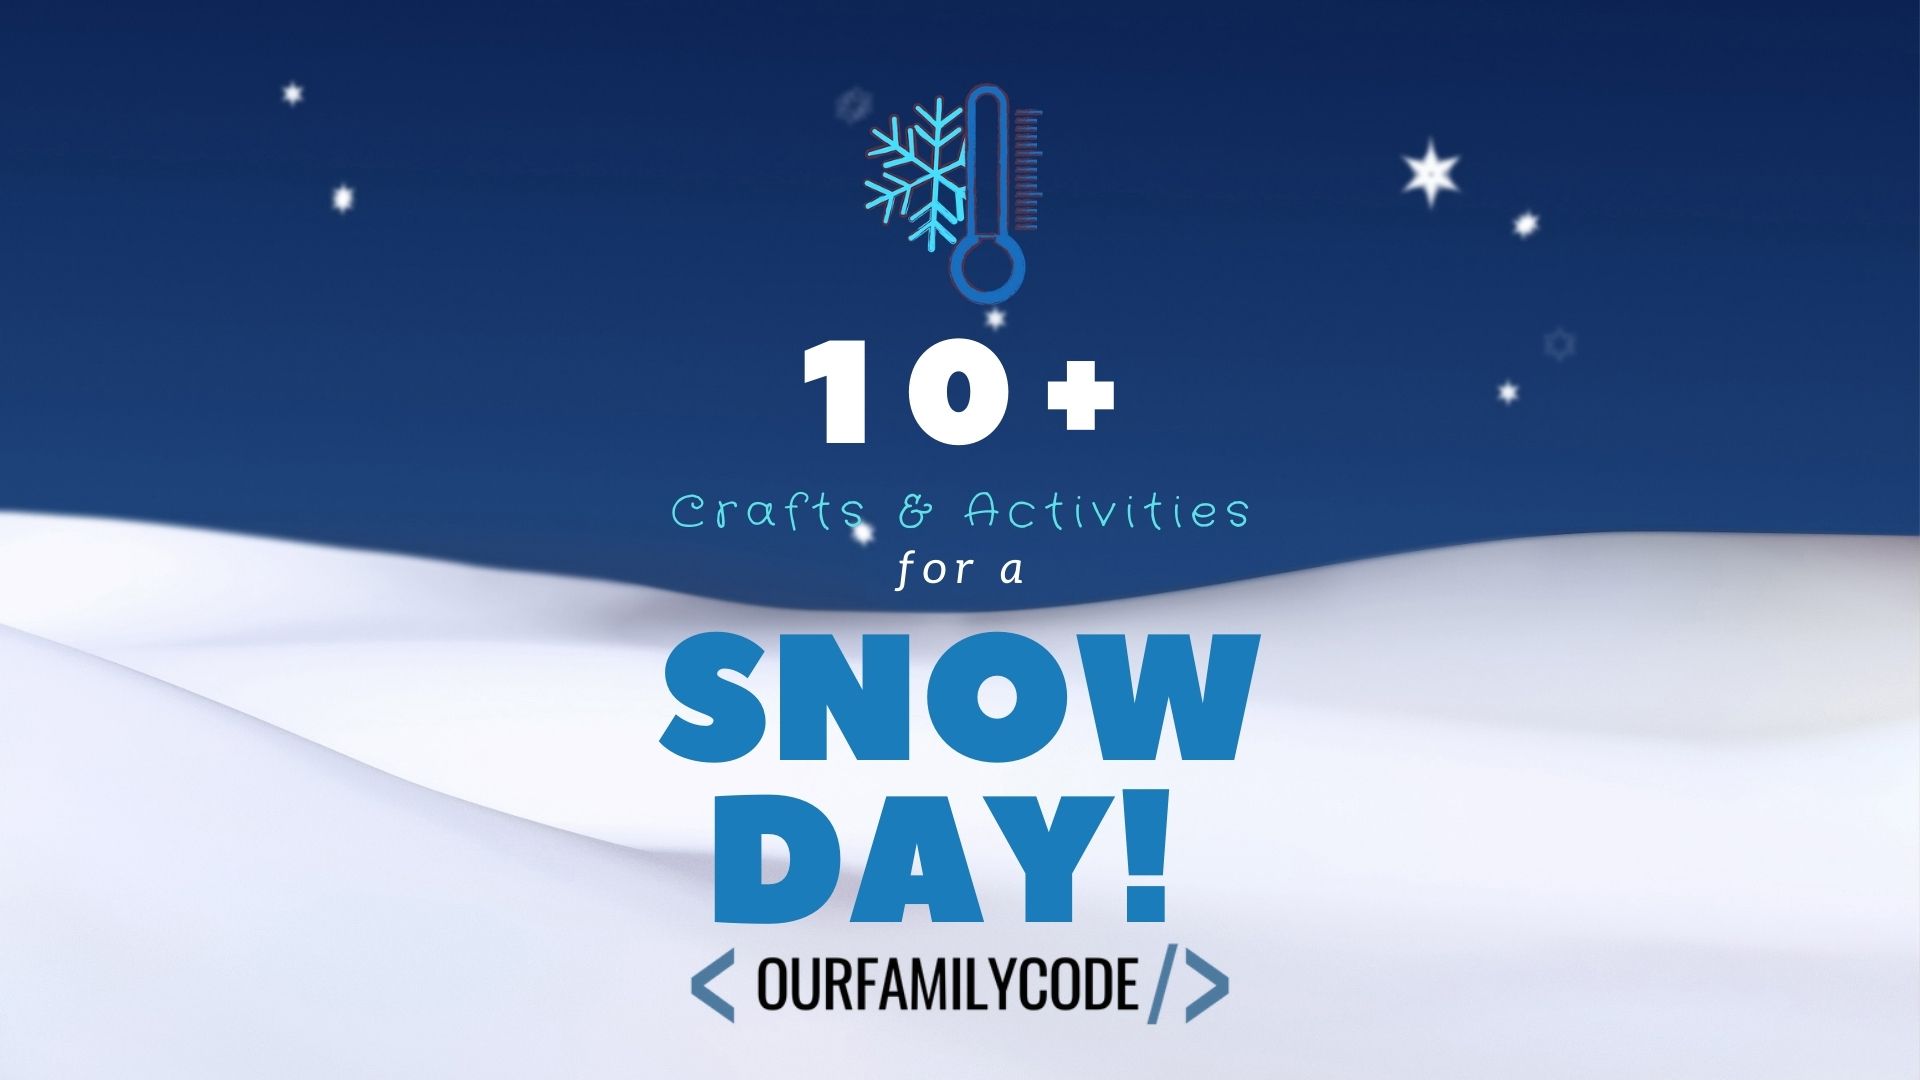 Check out these great snow day crafts for kids and winter activities to keep the kids warm and entertained this winter season while also keeping your sanity! #kidscrafts #snowday #homeschool #toddleractivities